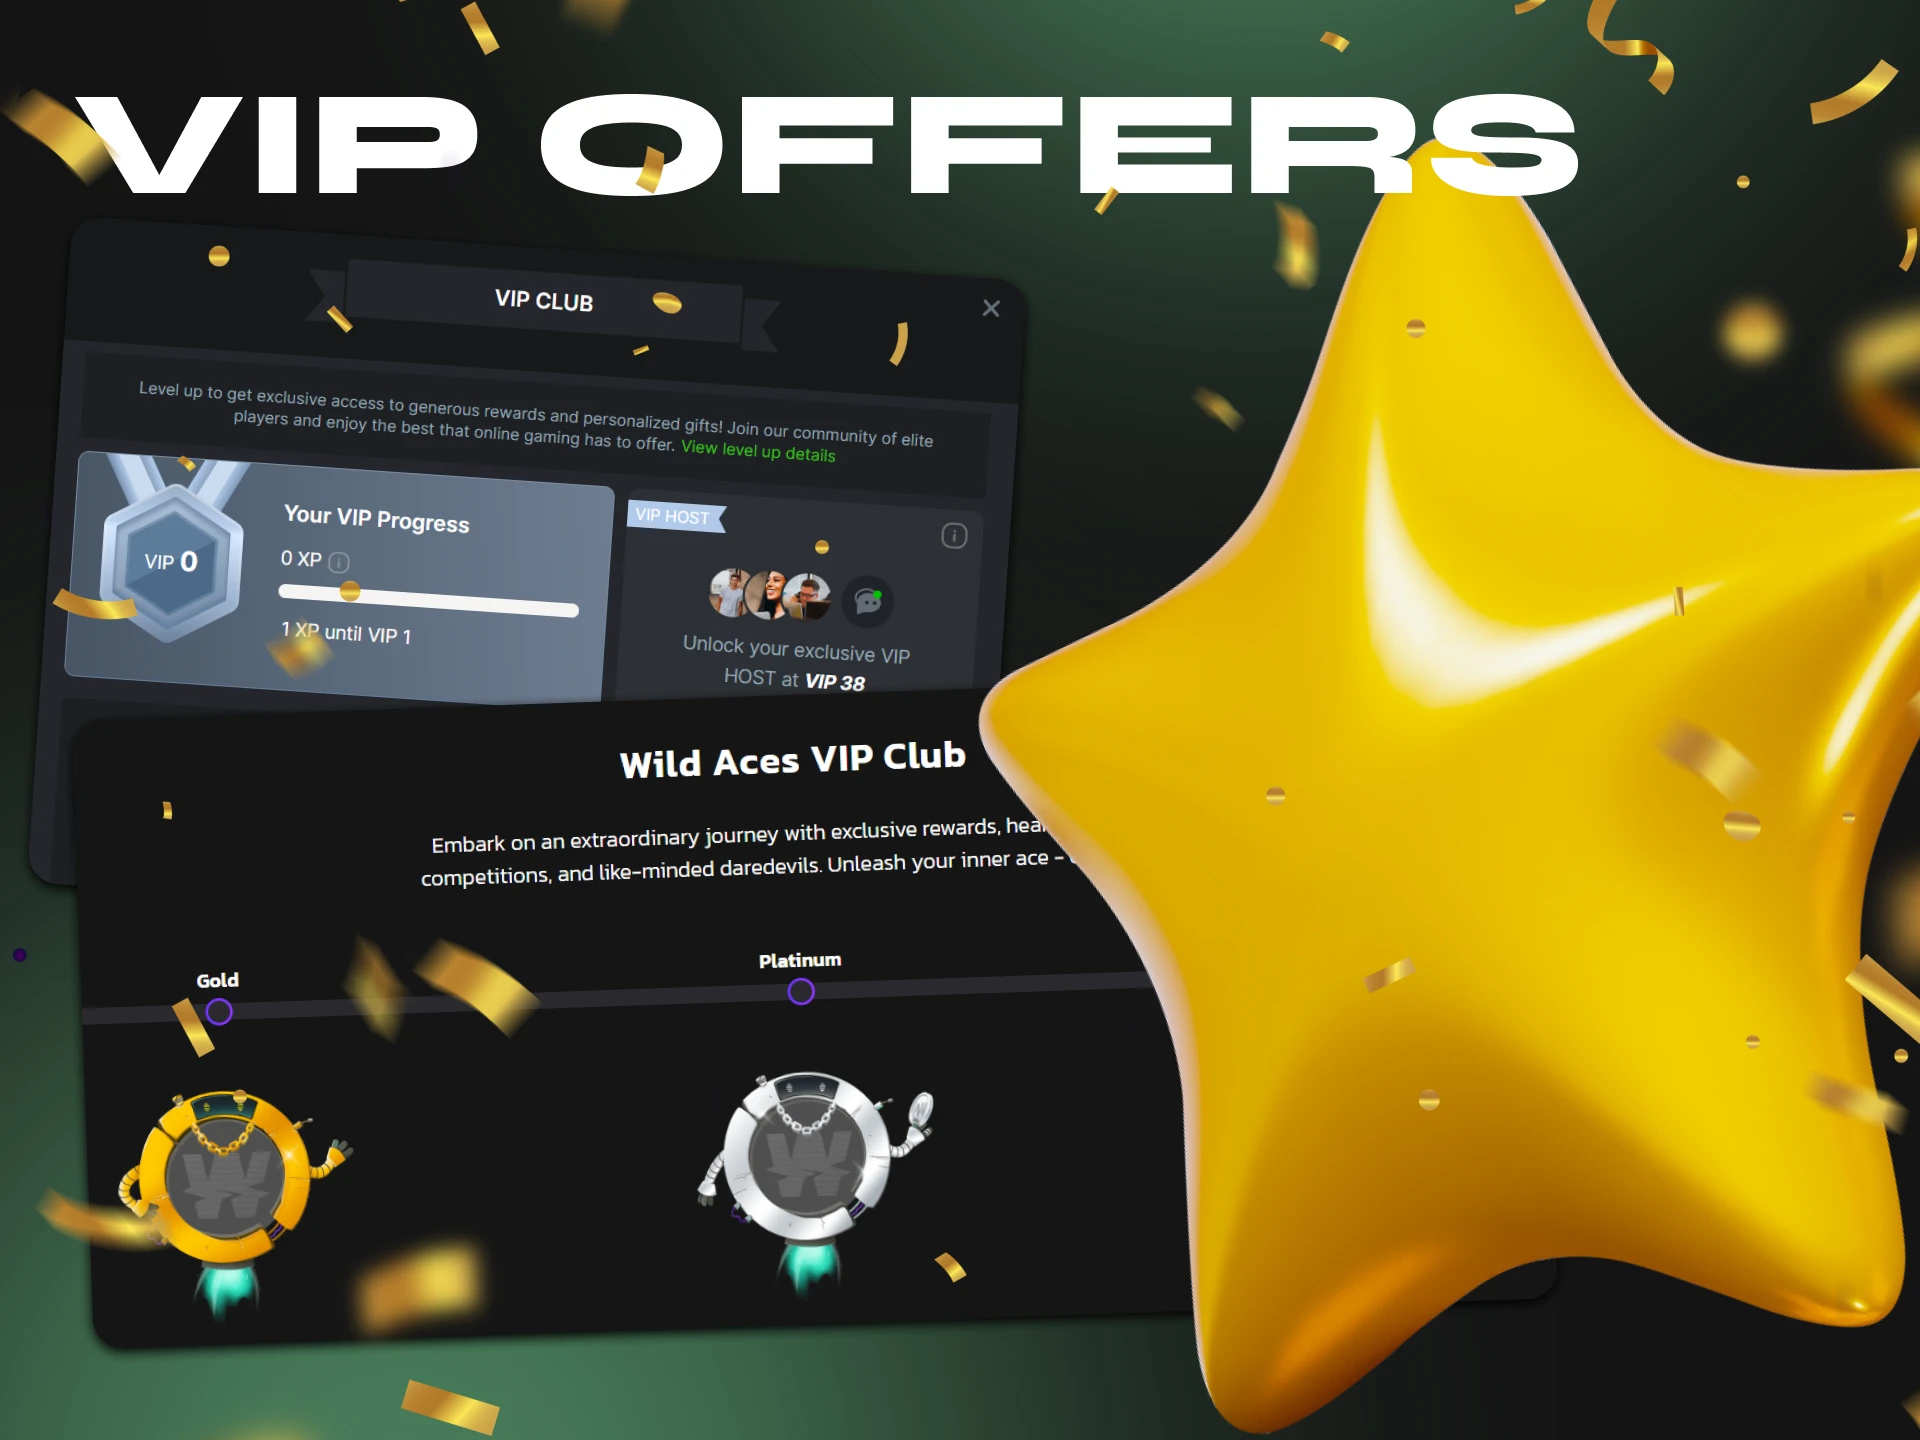 Join the VIP club and receive bonuses for playing poker with cryptocurrency.